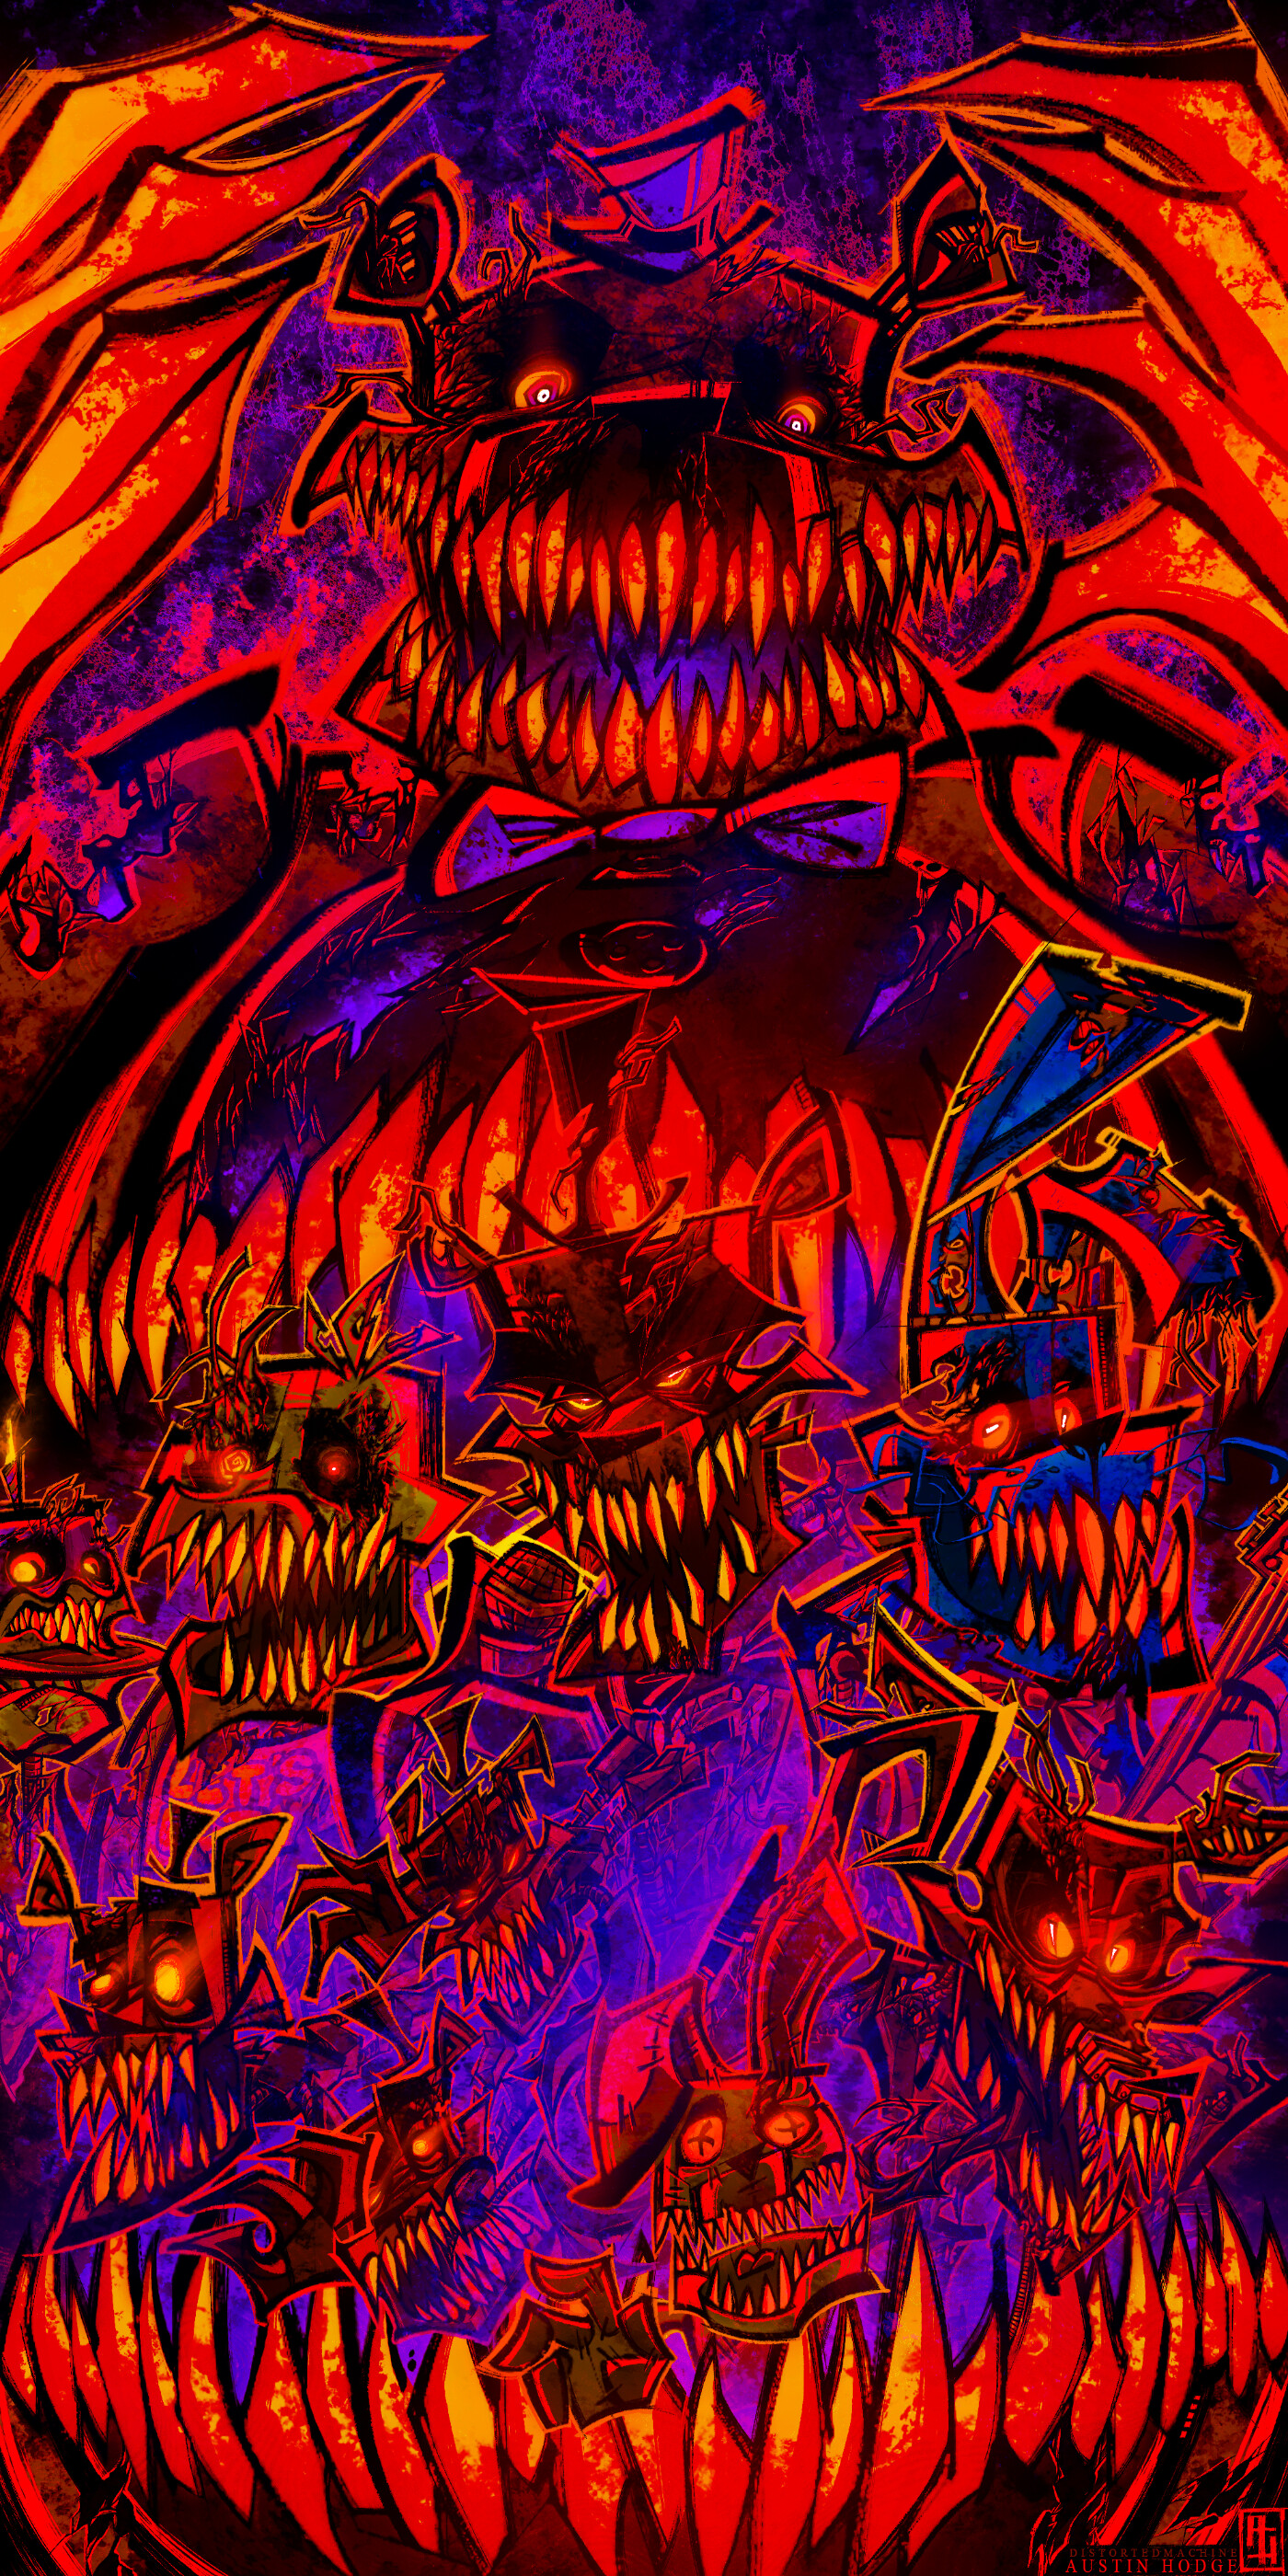 Abstract Distract: Five Nights at Freddy's 4 + Brutal Doom 